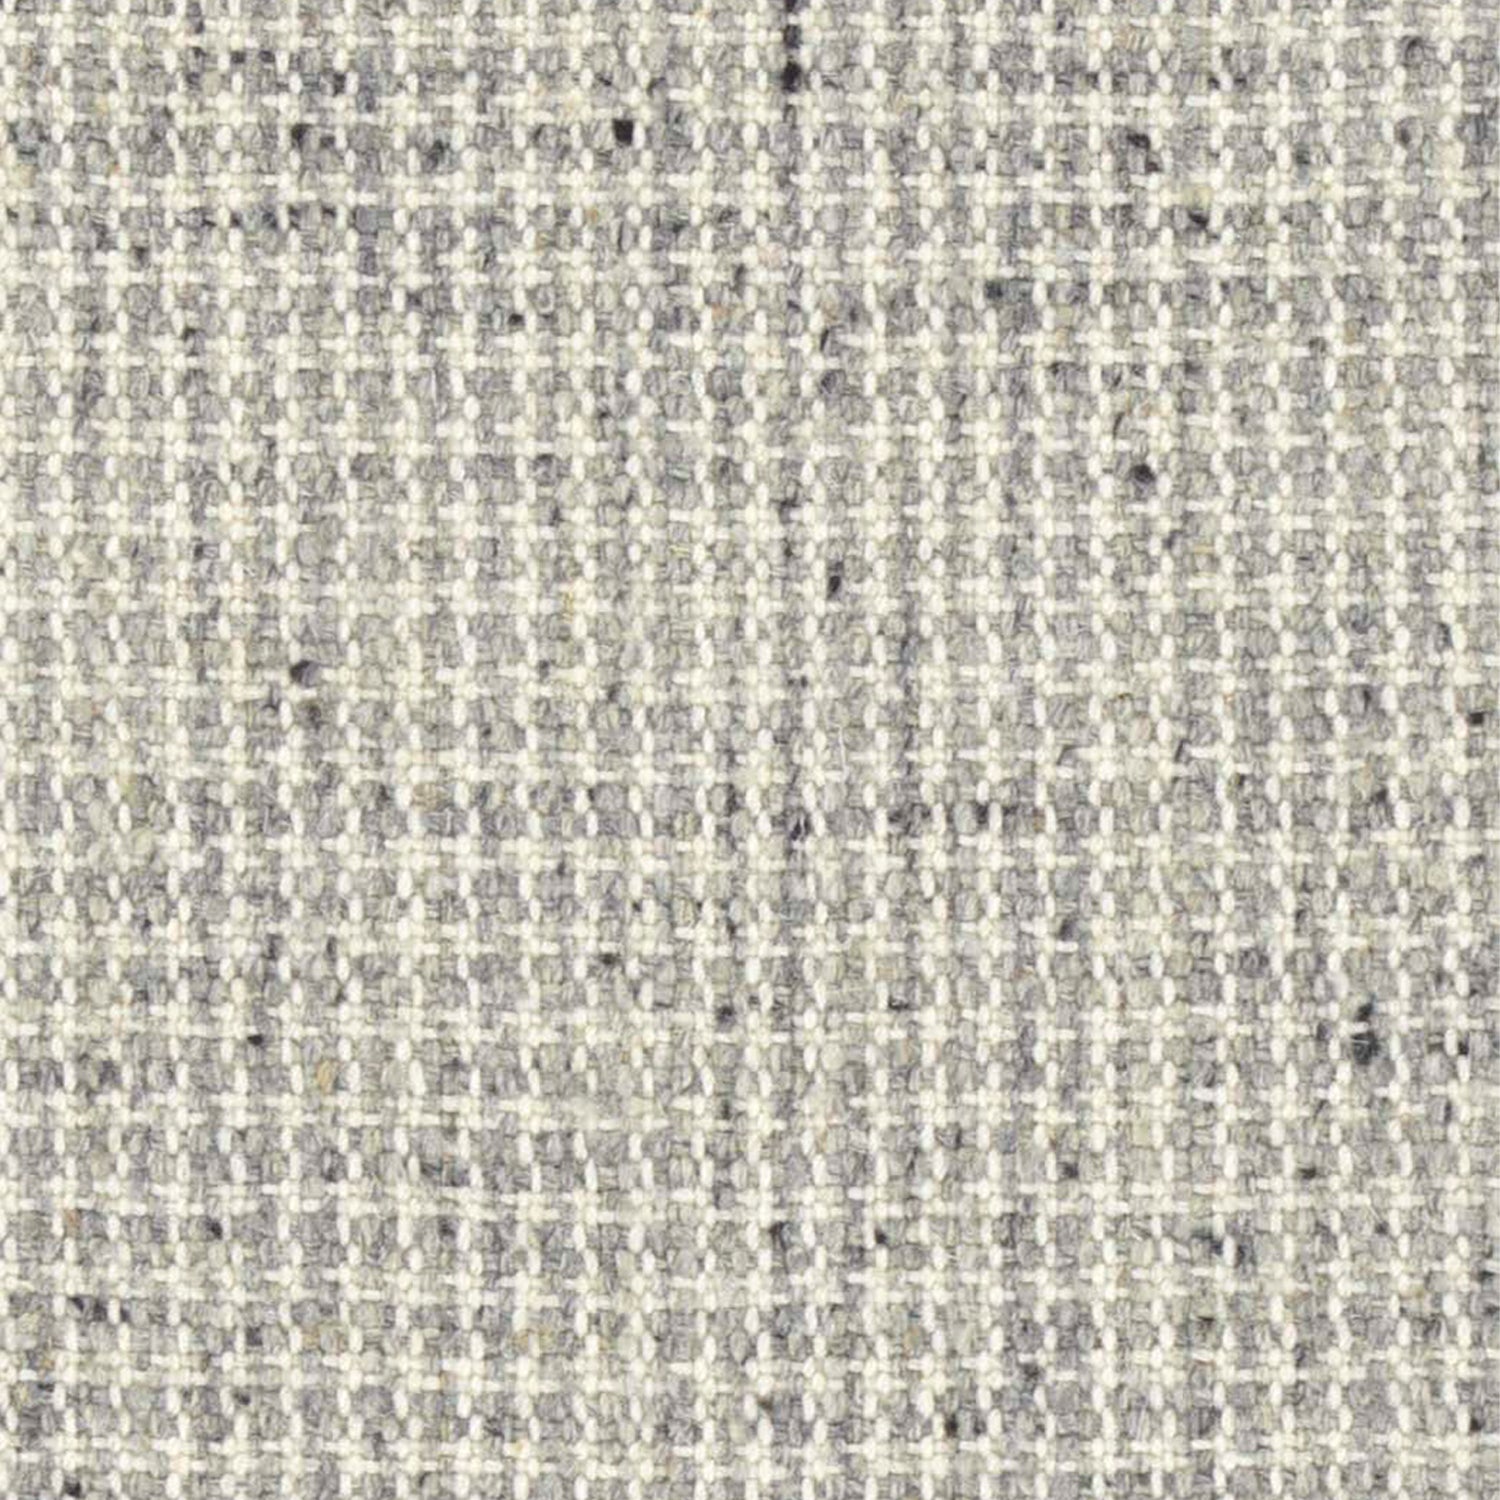 Wool broadloom carpet swatch in a chunky tweed weave in mottled cream and gray.